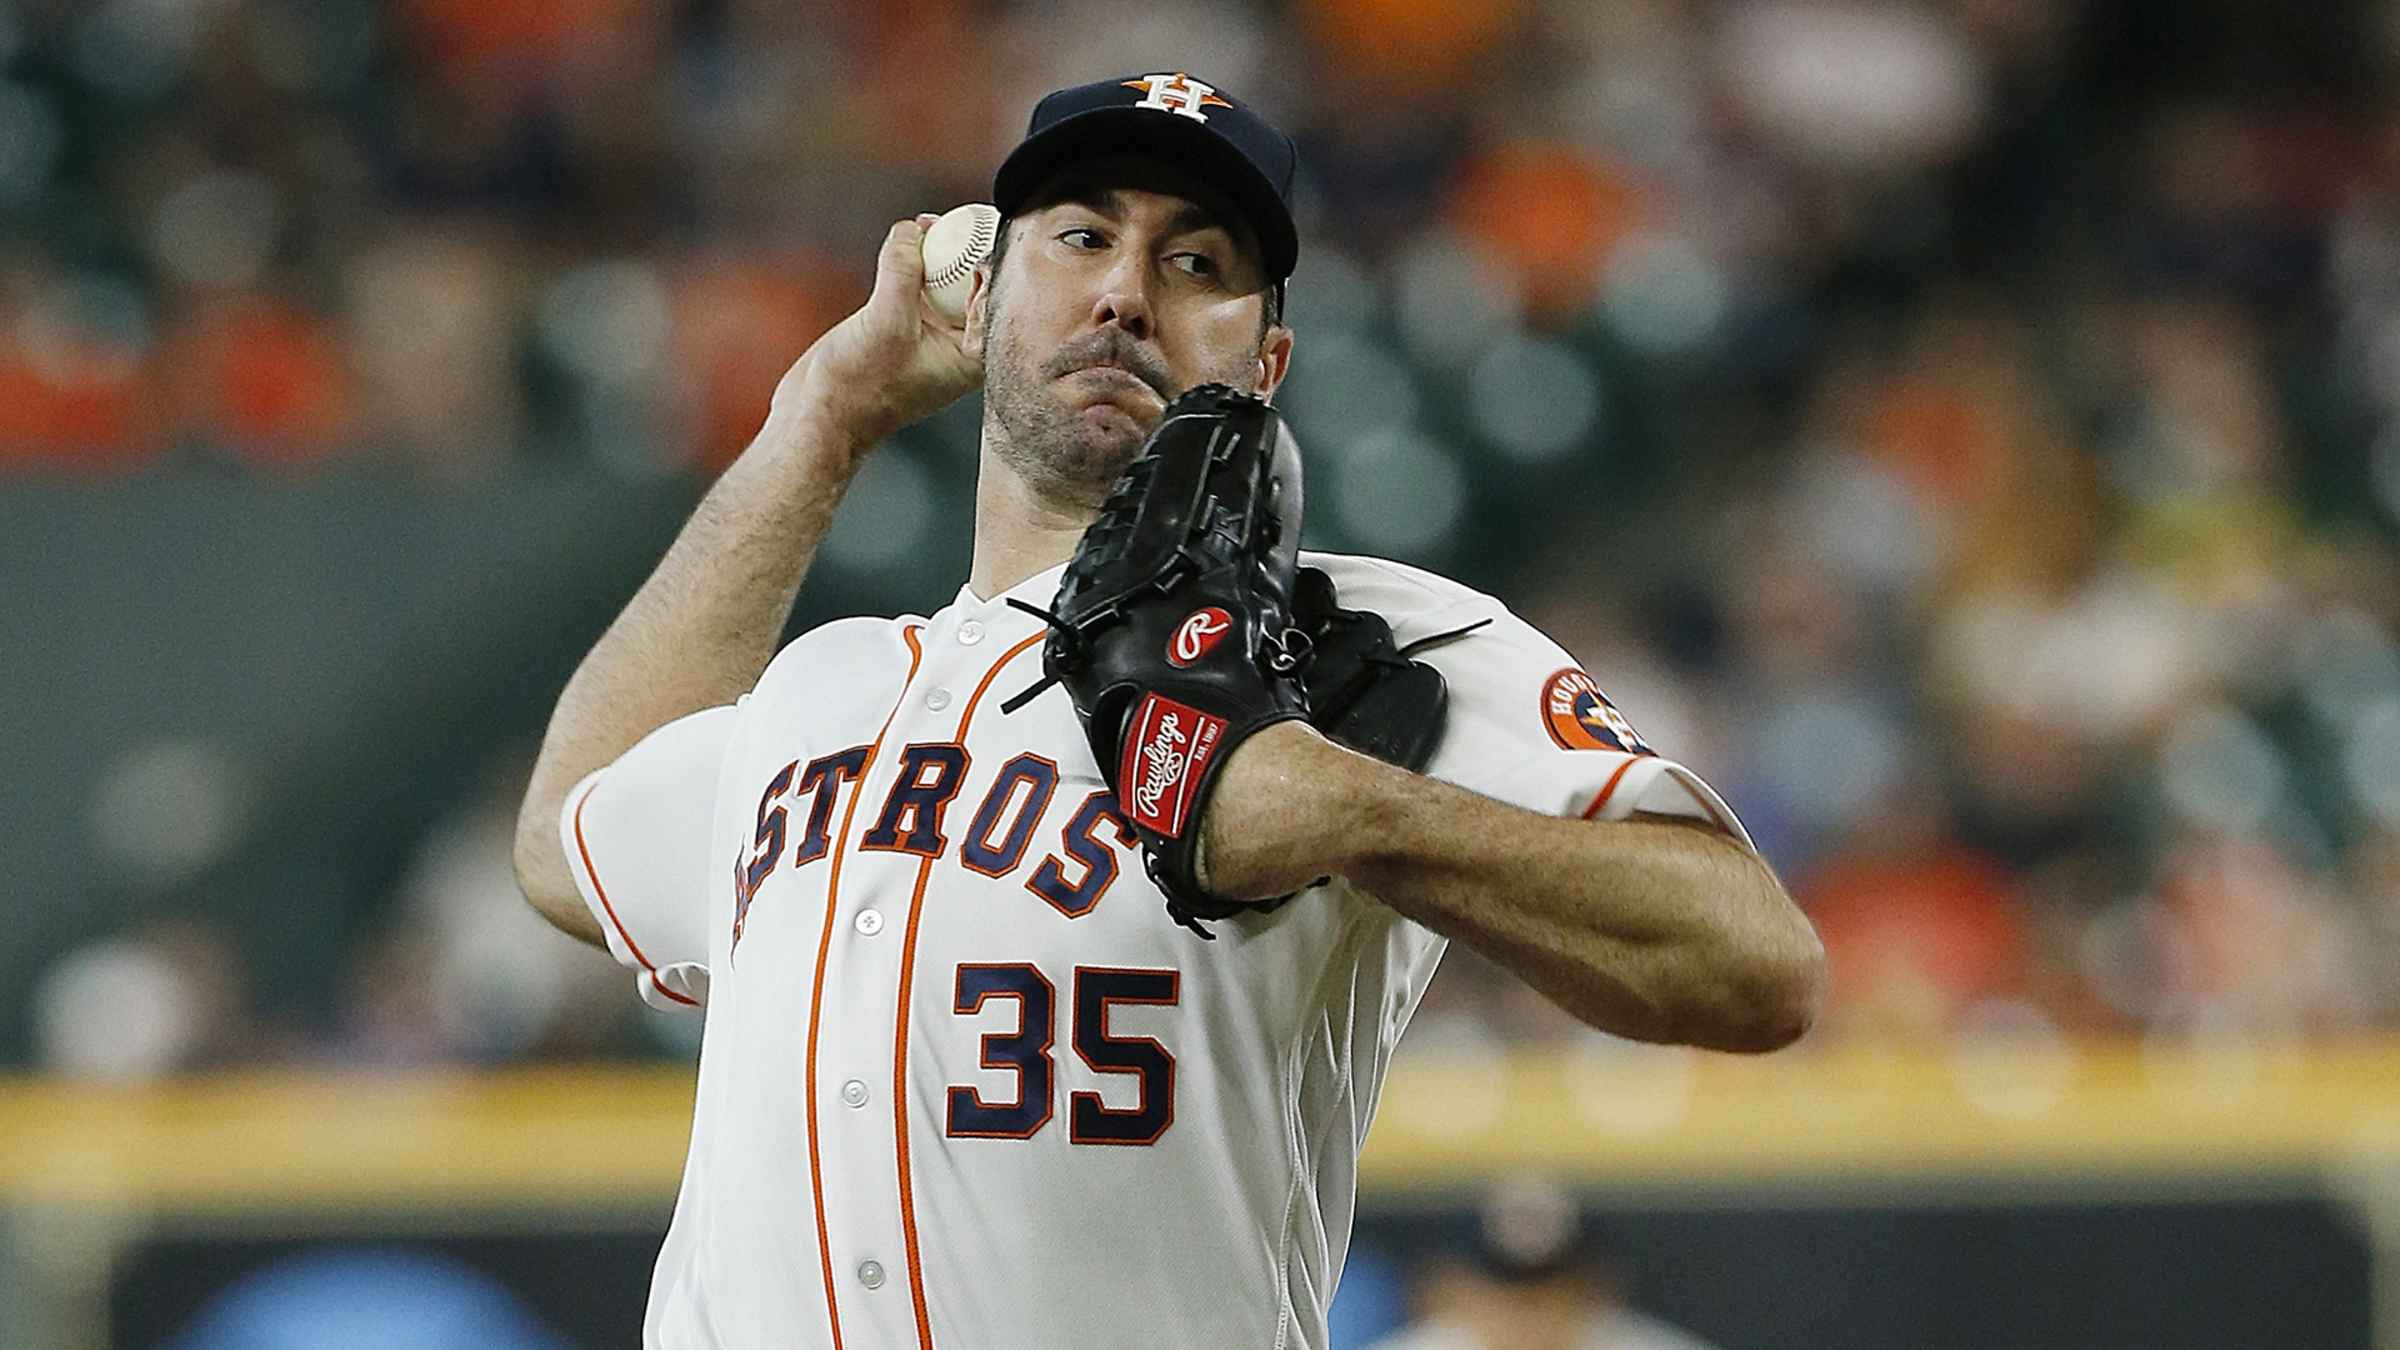 Astros' Verlander sidelined by back injury - The San Diego Union